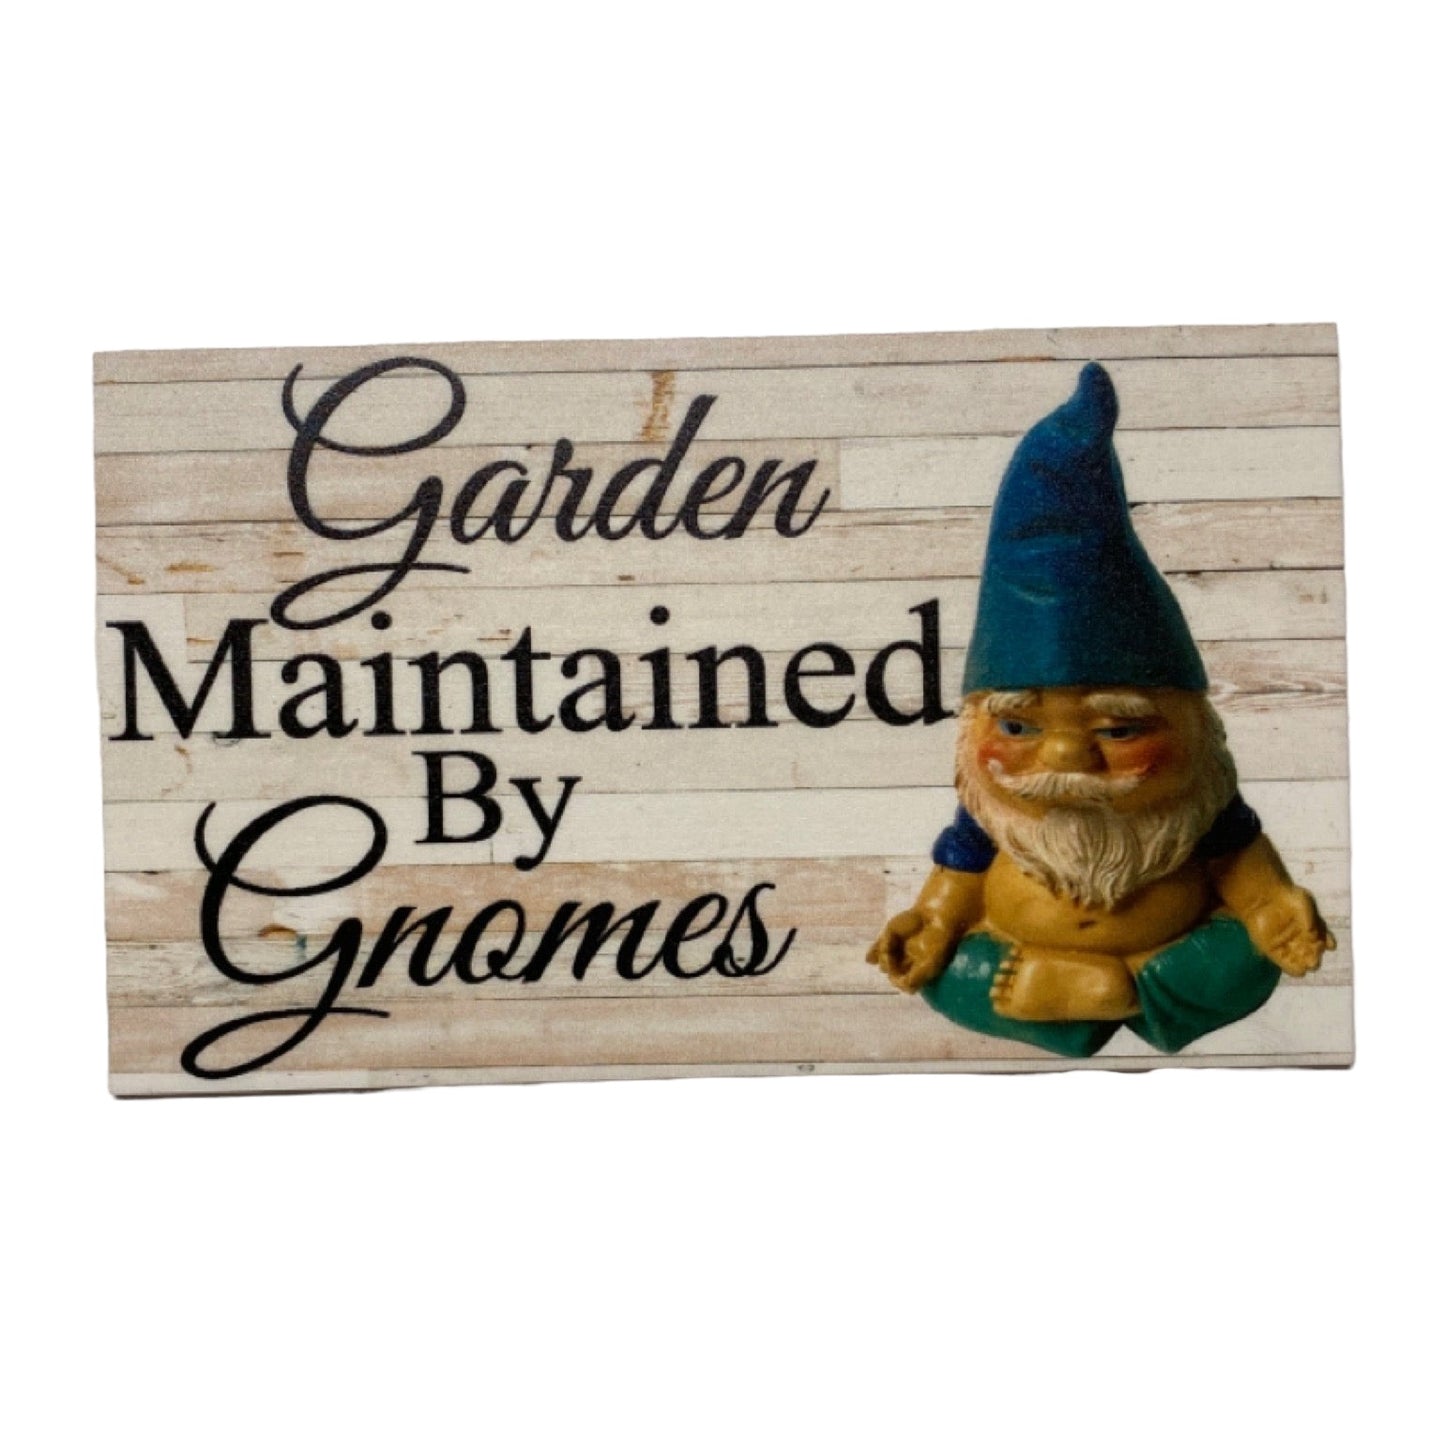 Garden Maintained By Gnomes Rustic Sign - The Renmy Store Homewares & Gifts 